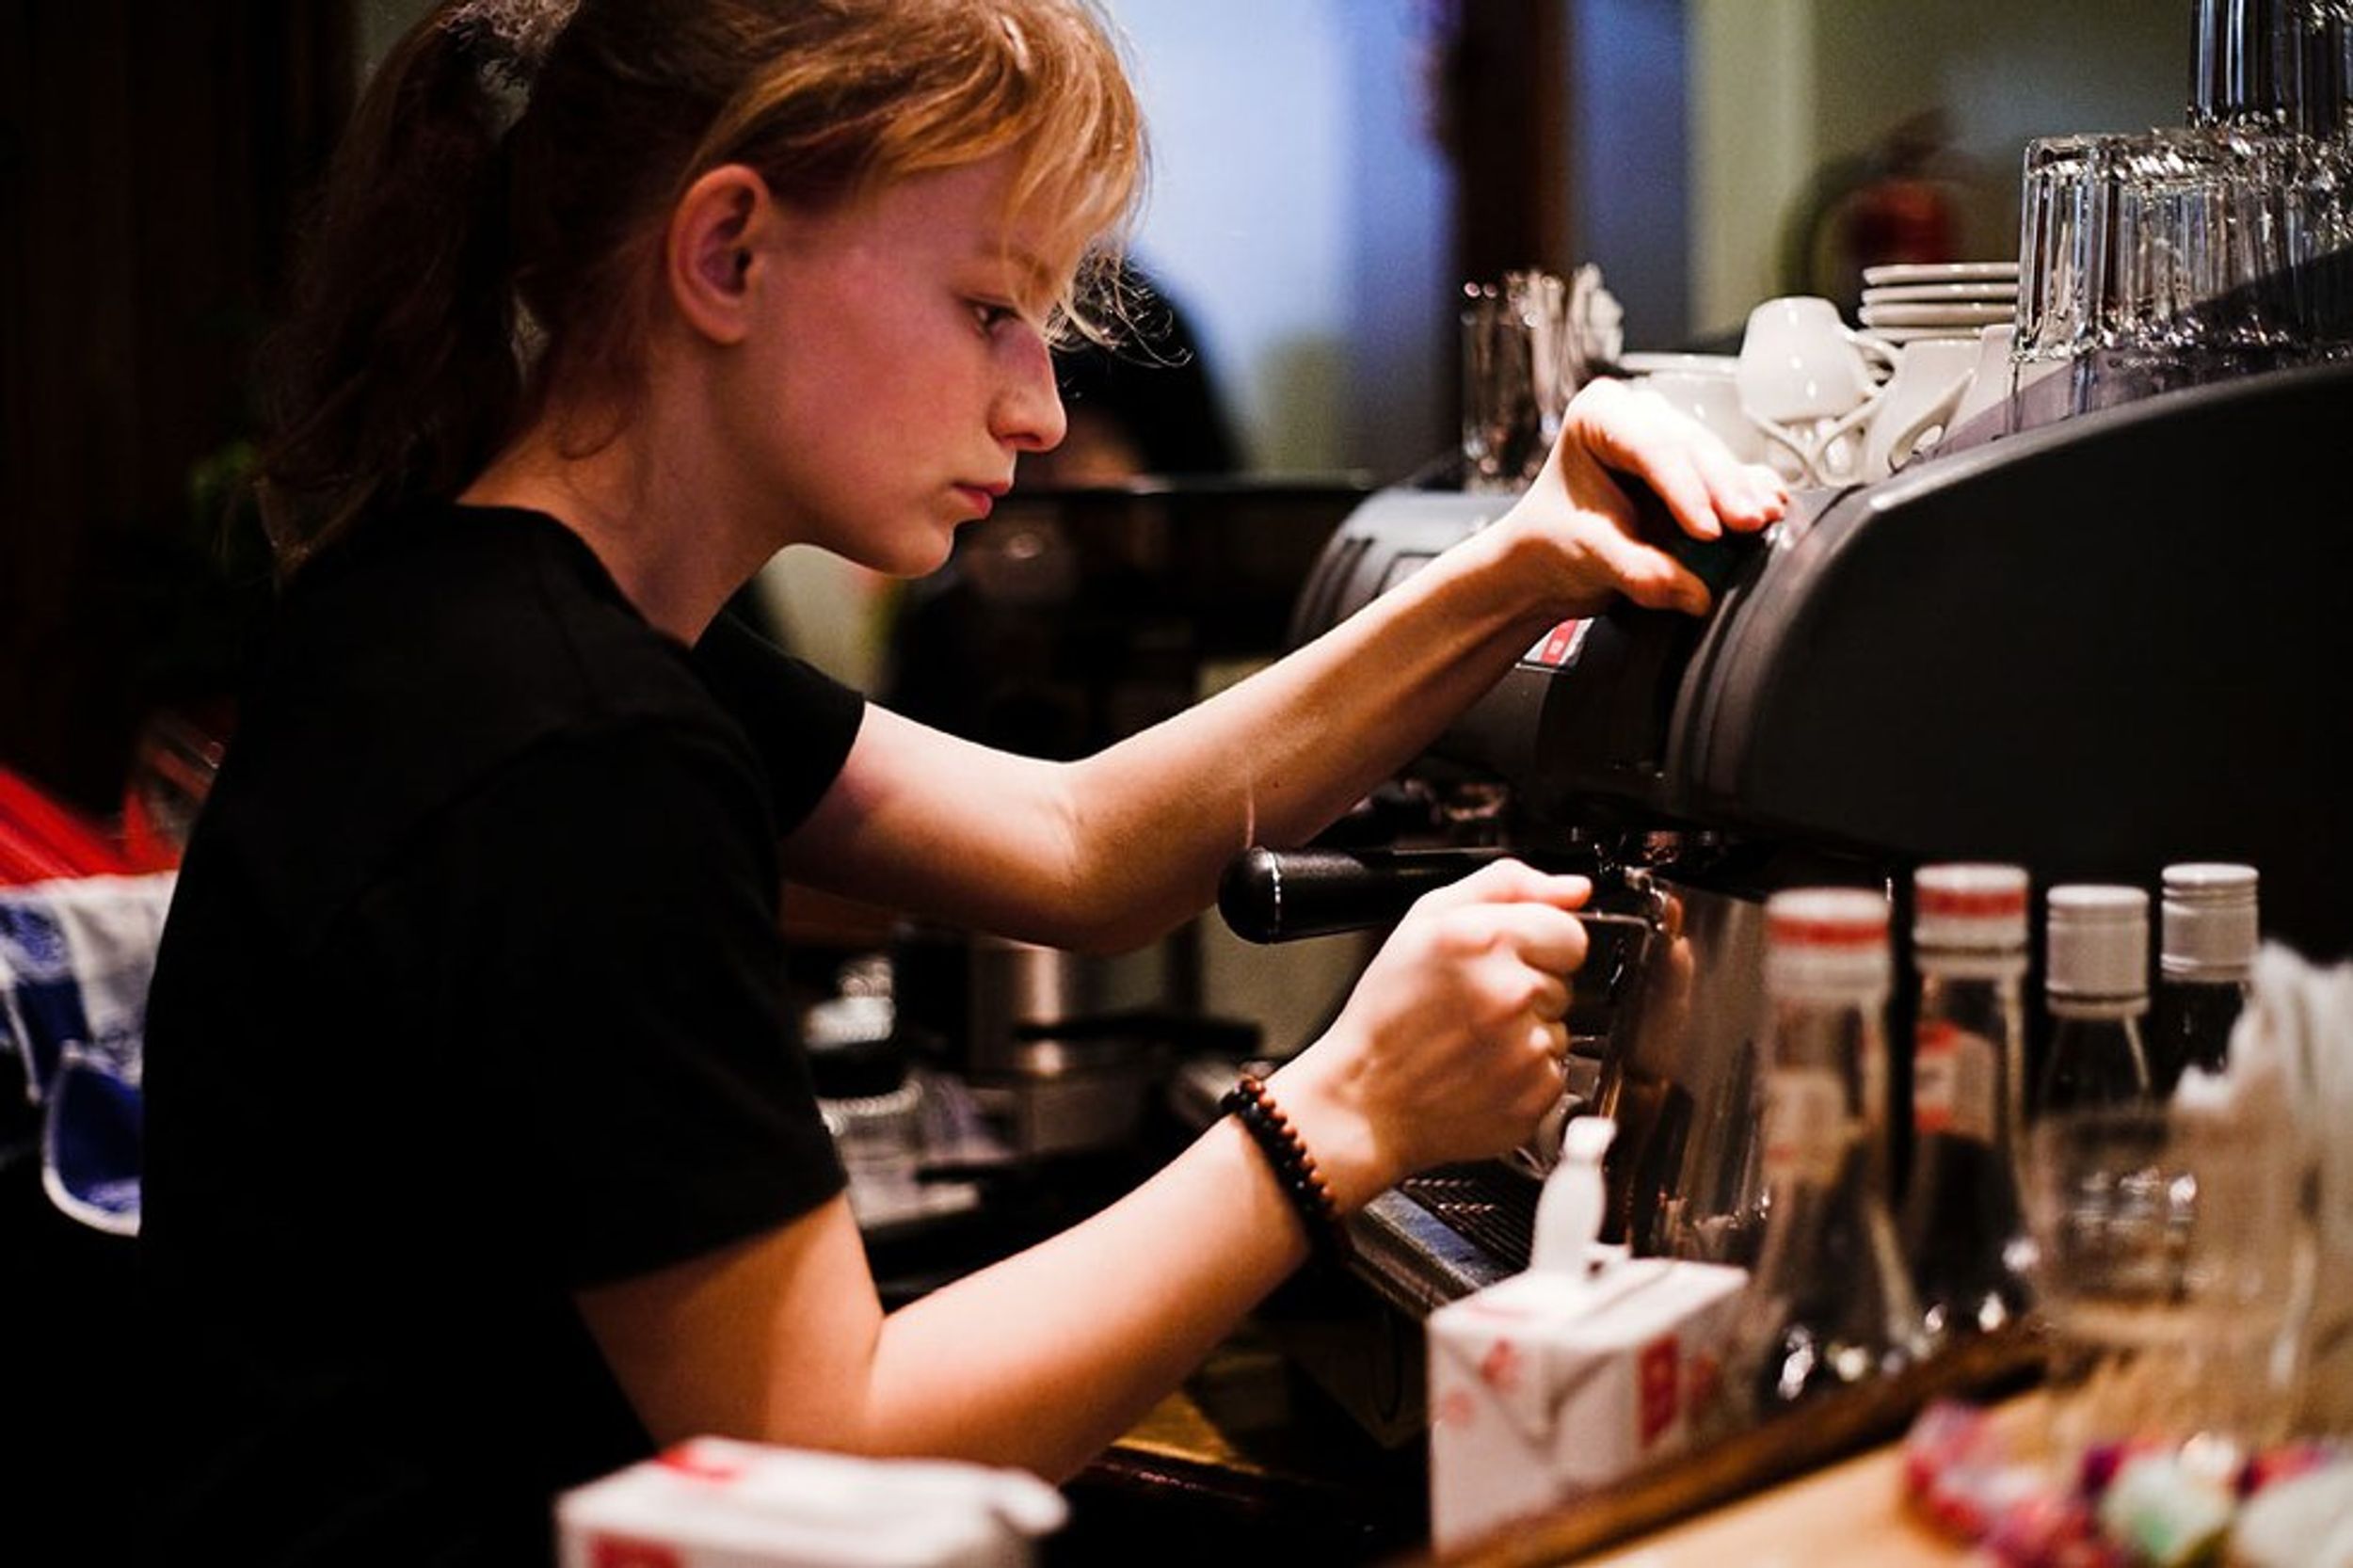 20 Ways You Know You're A Barista